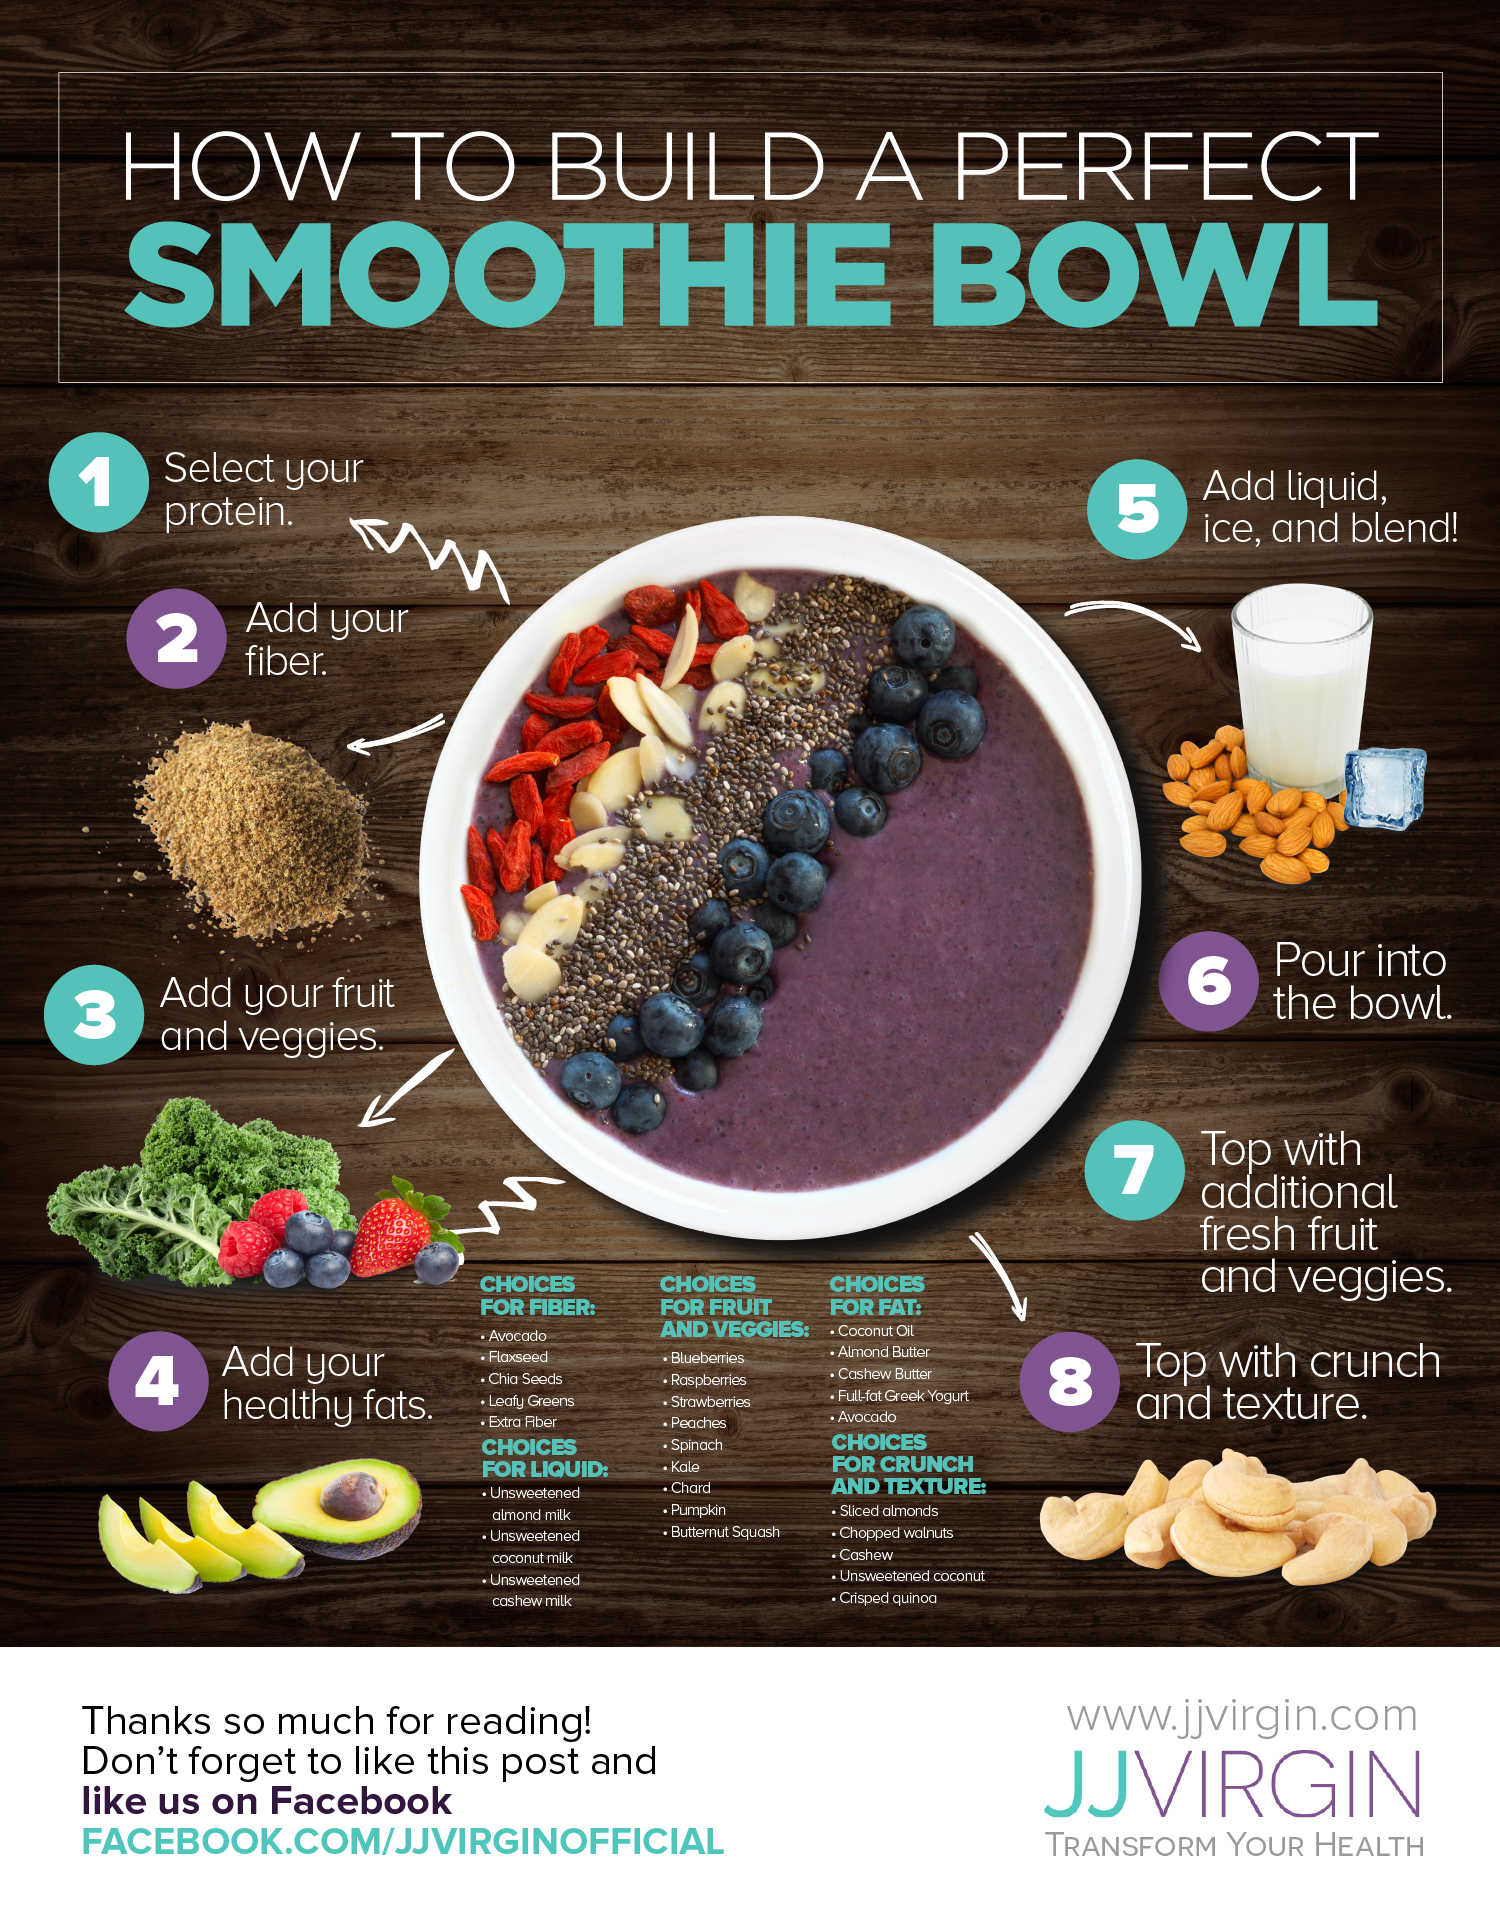 How to Build the Ultimate Smoothie Bowl In 10 Minutes or Less